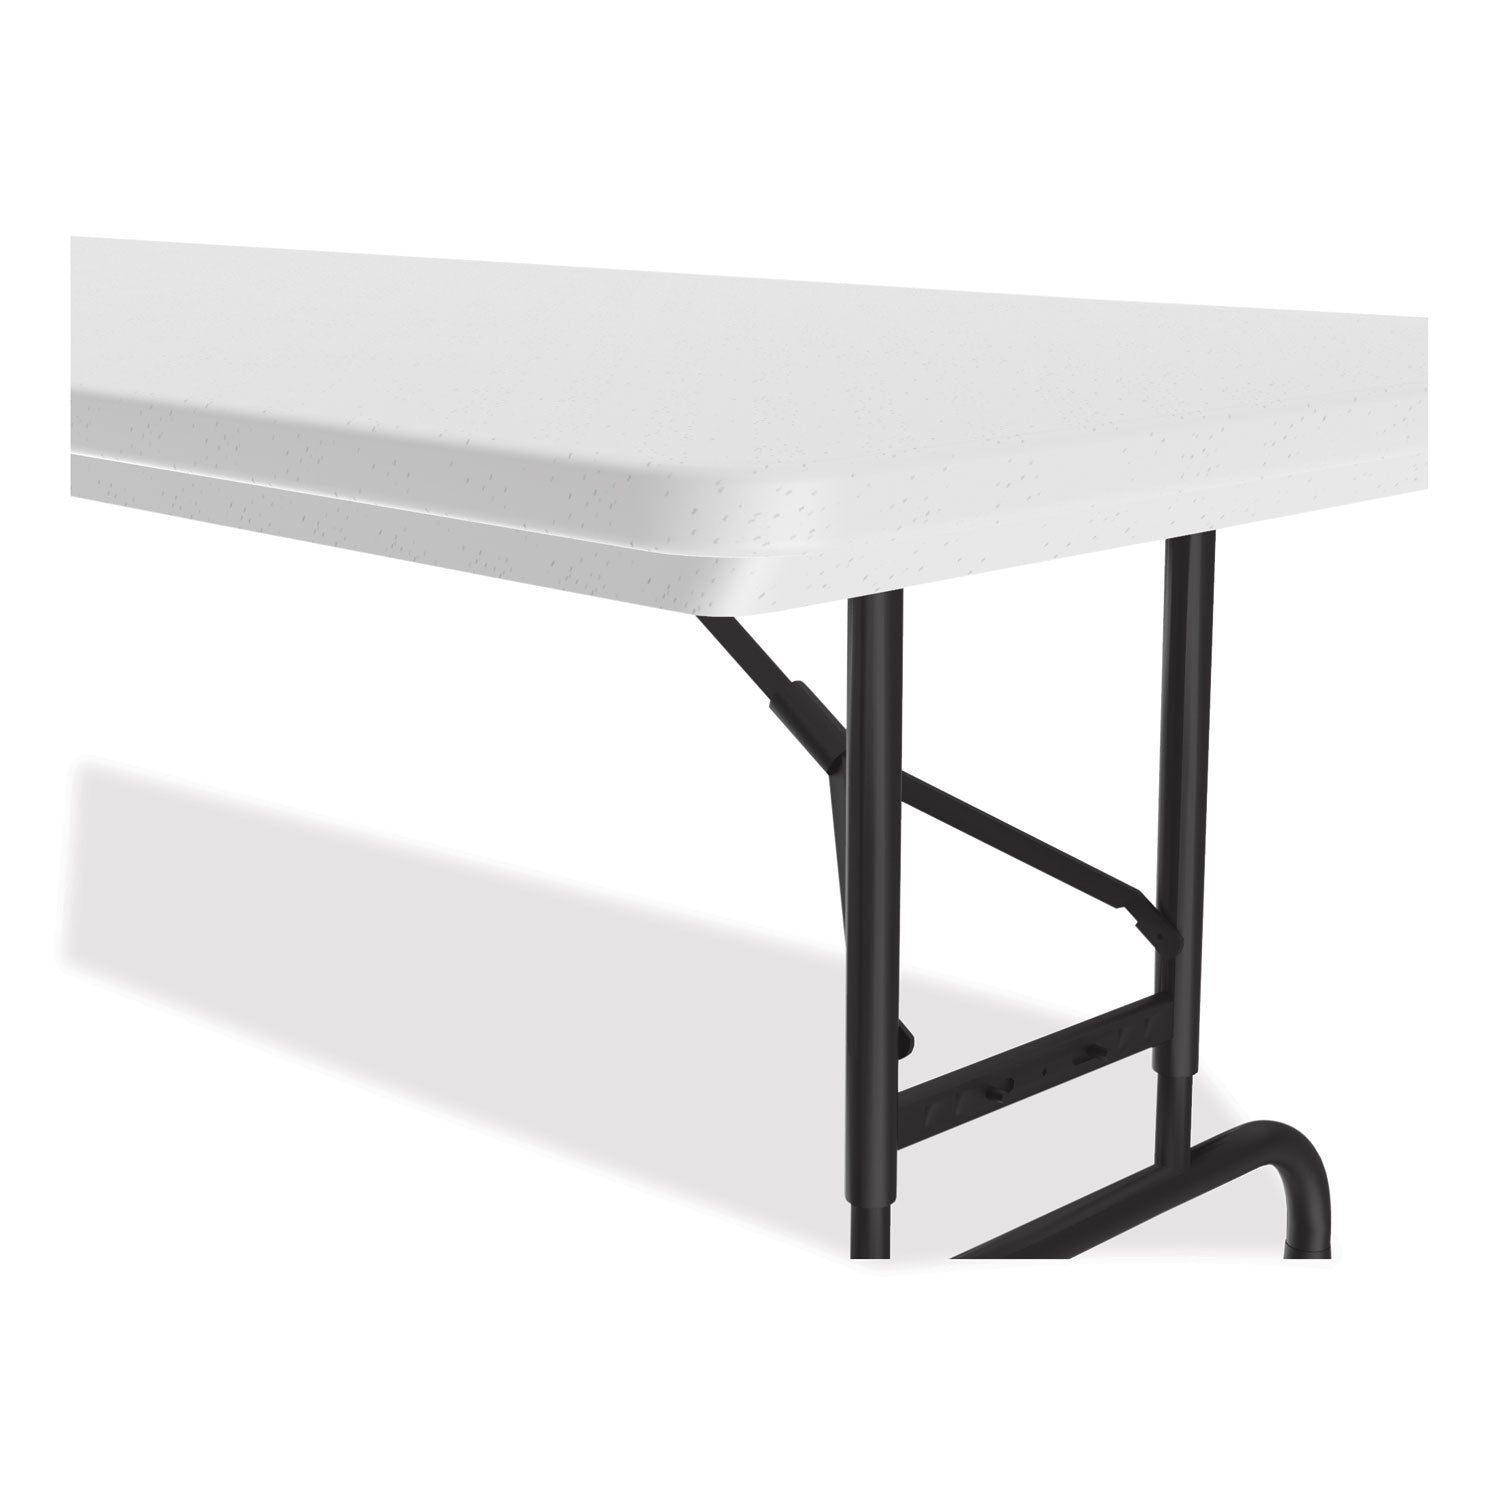 adjustable-folding-tables-rectangular-72-x-30-x-22-to-32-gray-top-black-legs-4-pallet-ships-in-4-6-business-days_crlra3072234p - 7